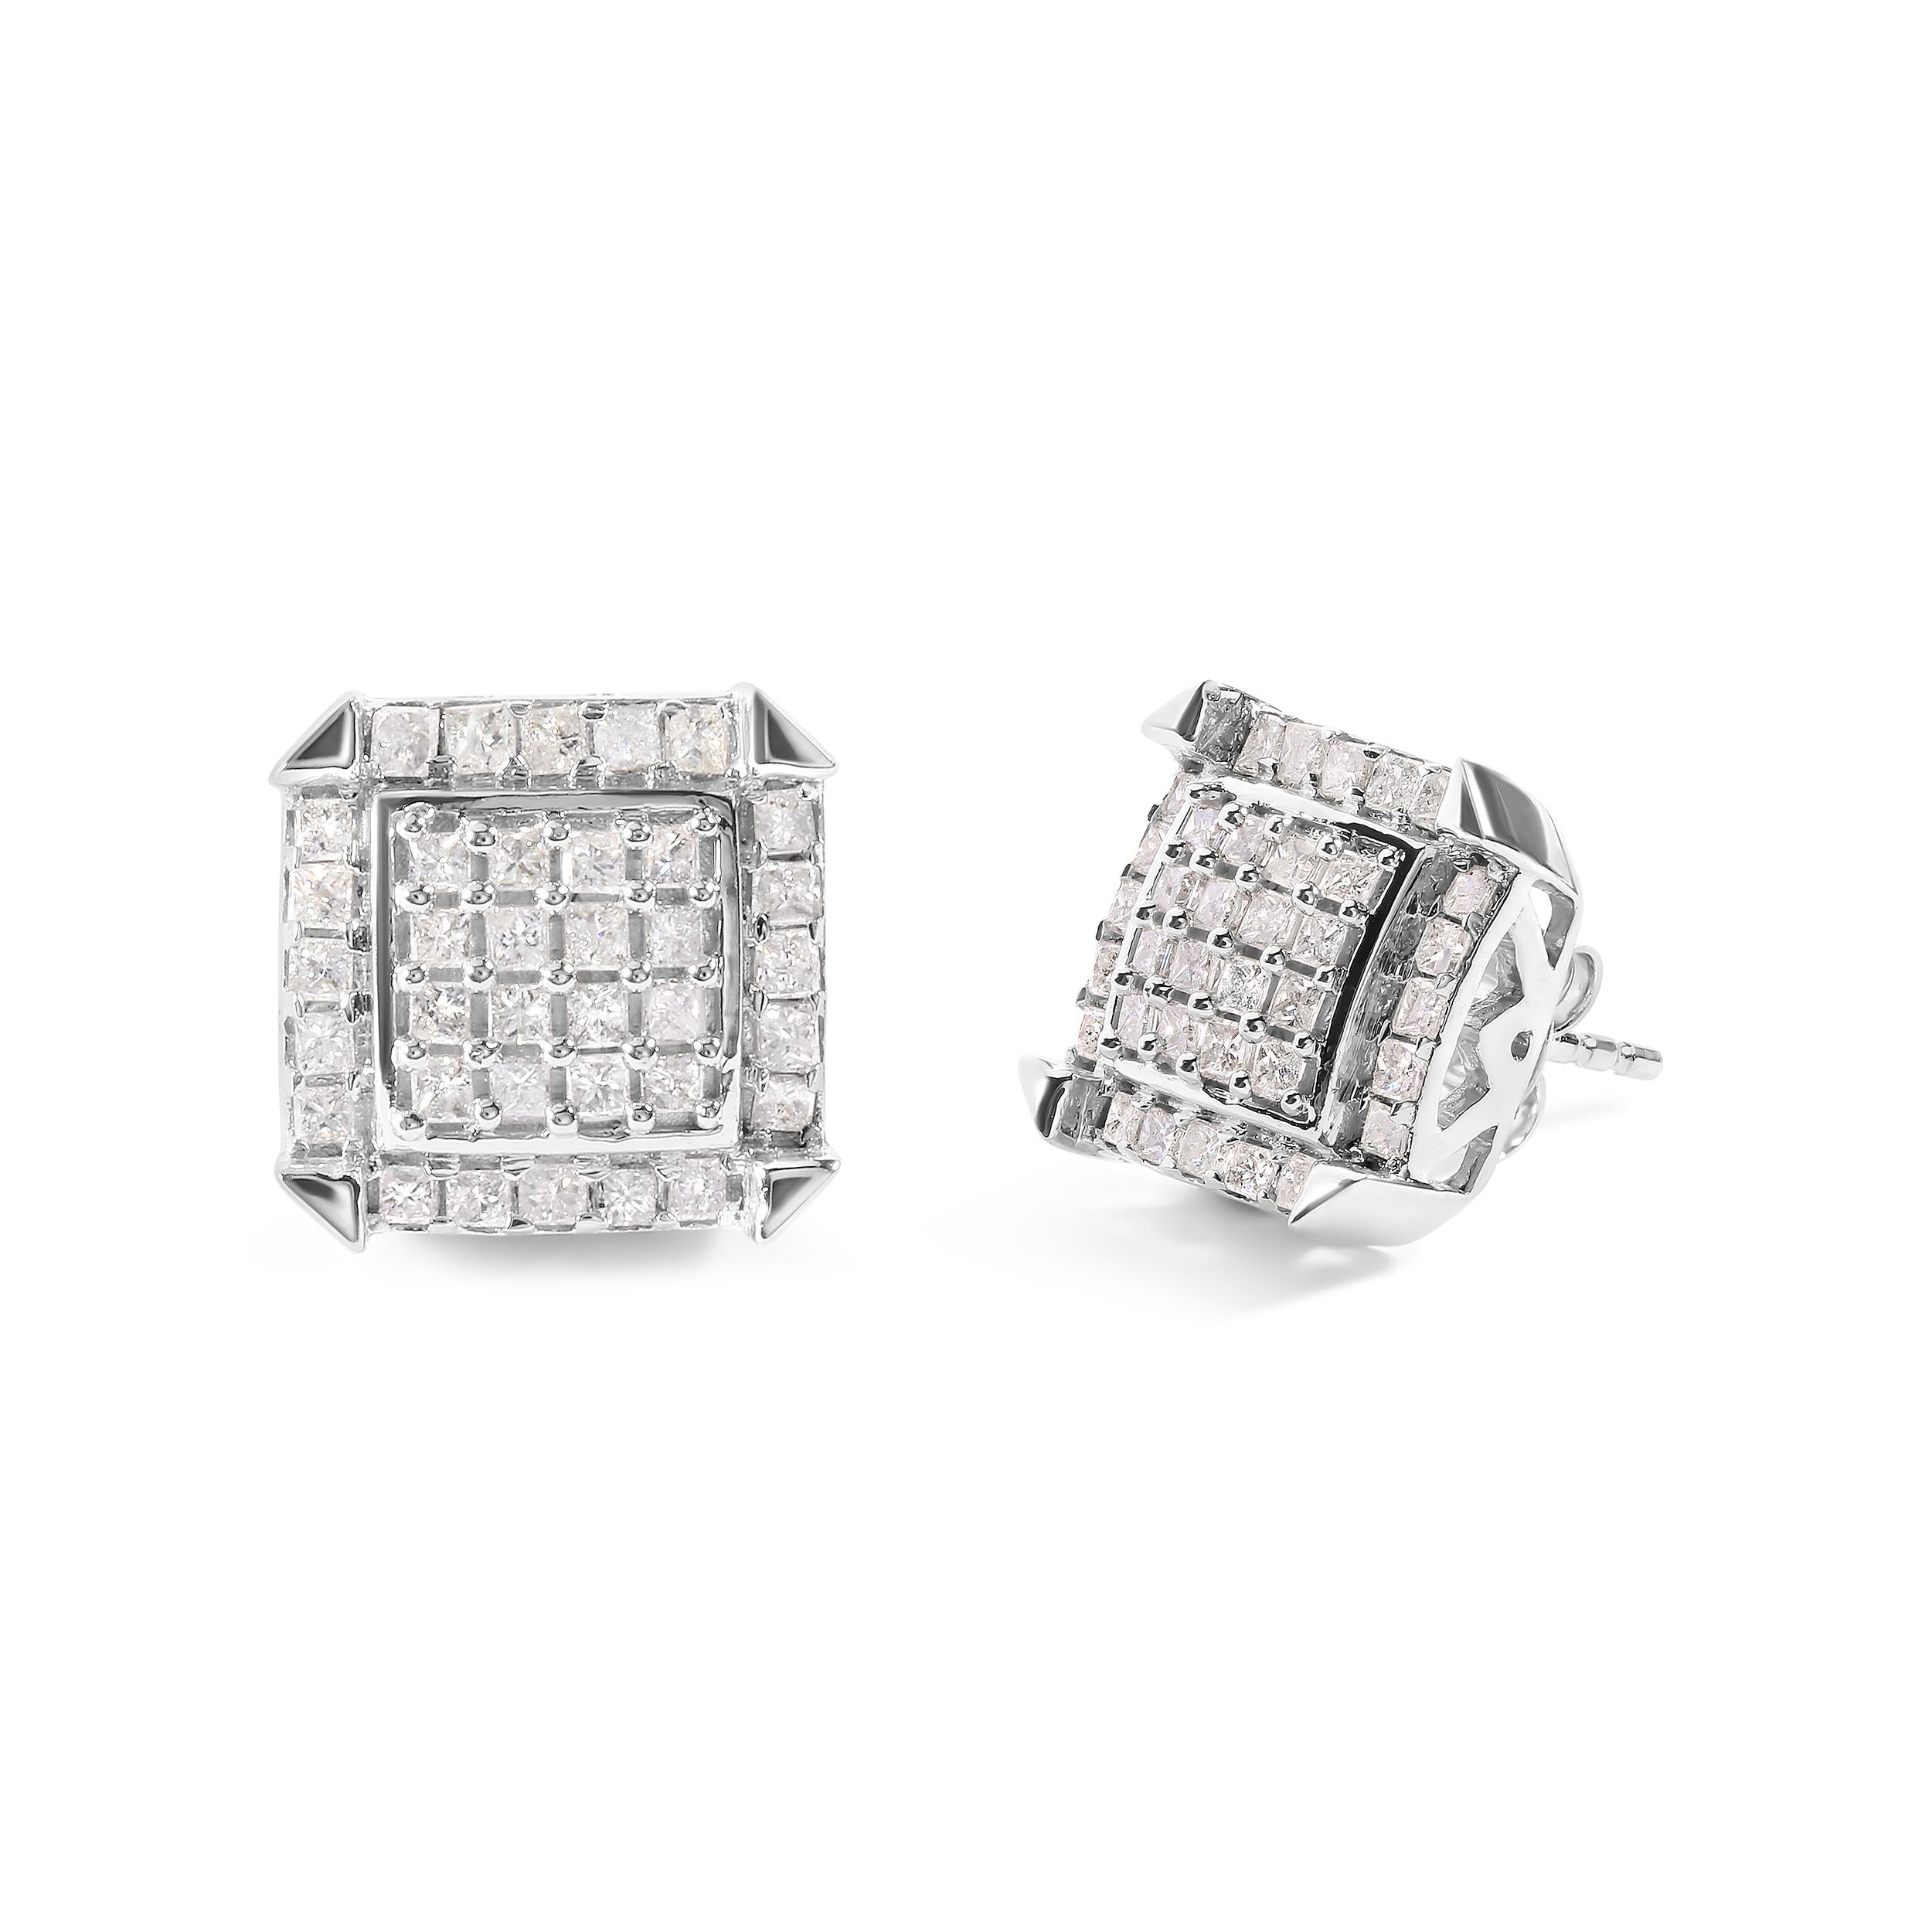 Indulge in the beauty of these stunning diamond composite and halo stud earrings, crafted from the finest 10K white gold. Featuring a total of 72 natural princess-cut diamonds arranged in a breathtaking composite design, these earrings exude